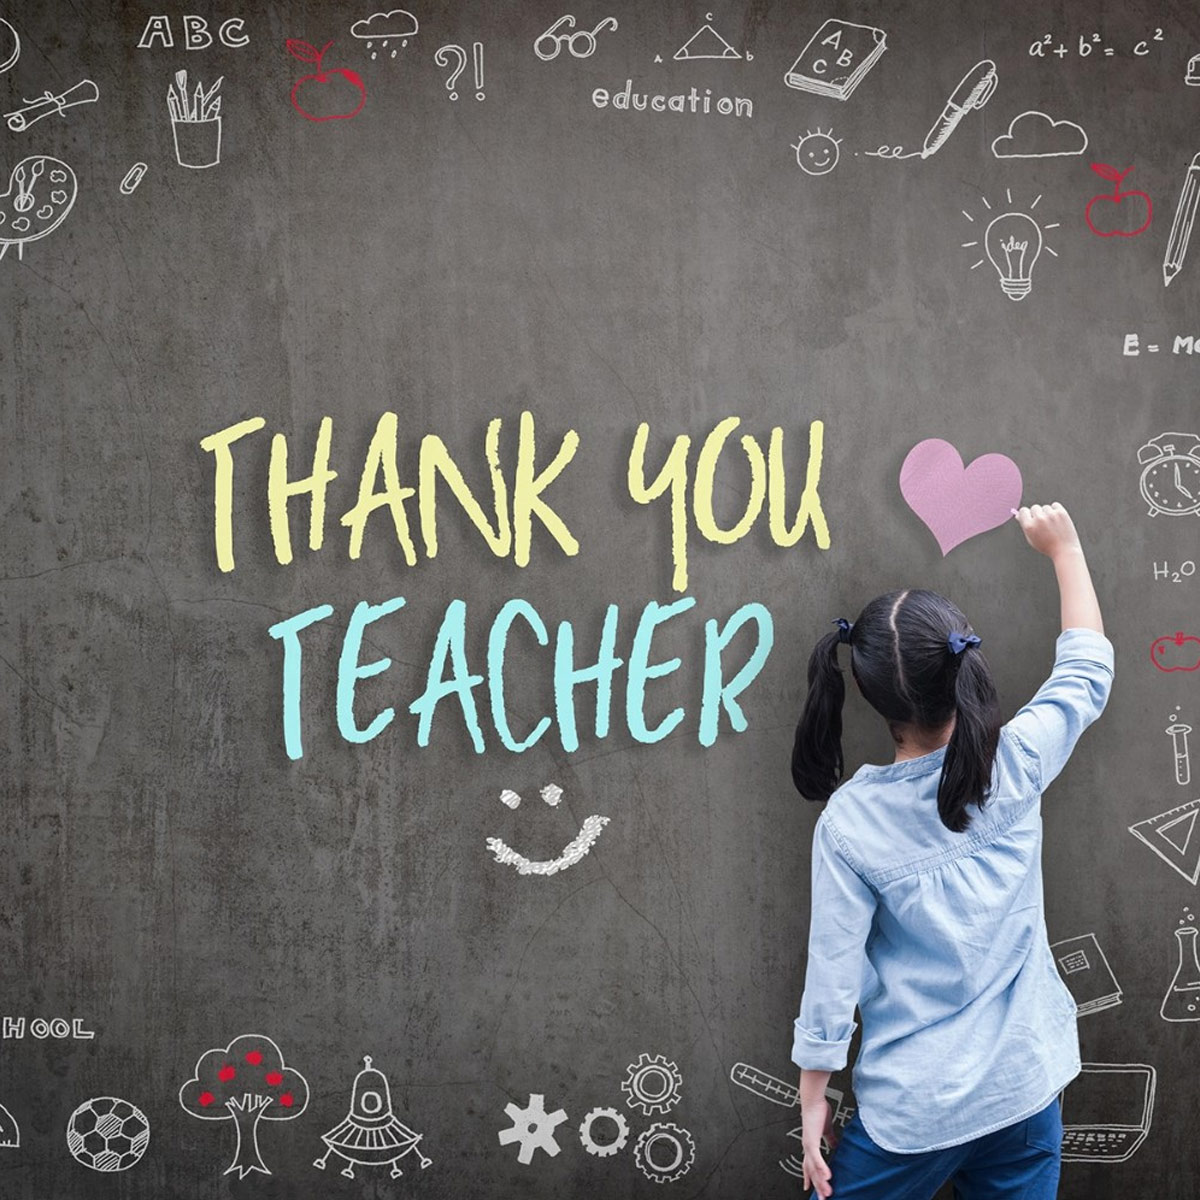 May 6-10 is Teacher Appreciation Week. You can send a message of appreciation to any IWCS teacher through our website. Just click on the link below and spread some joy to our teachers during Teacher Appreciation Week. k12insight.com/Lets-Talk/Dial…